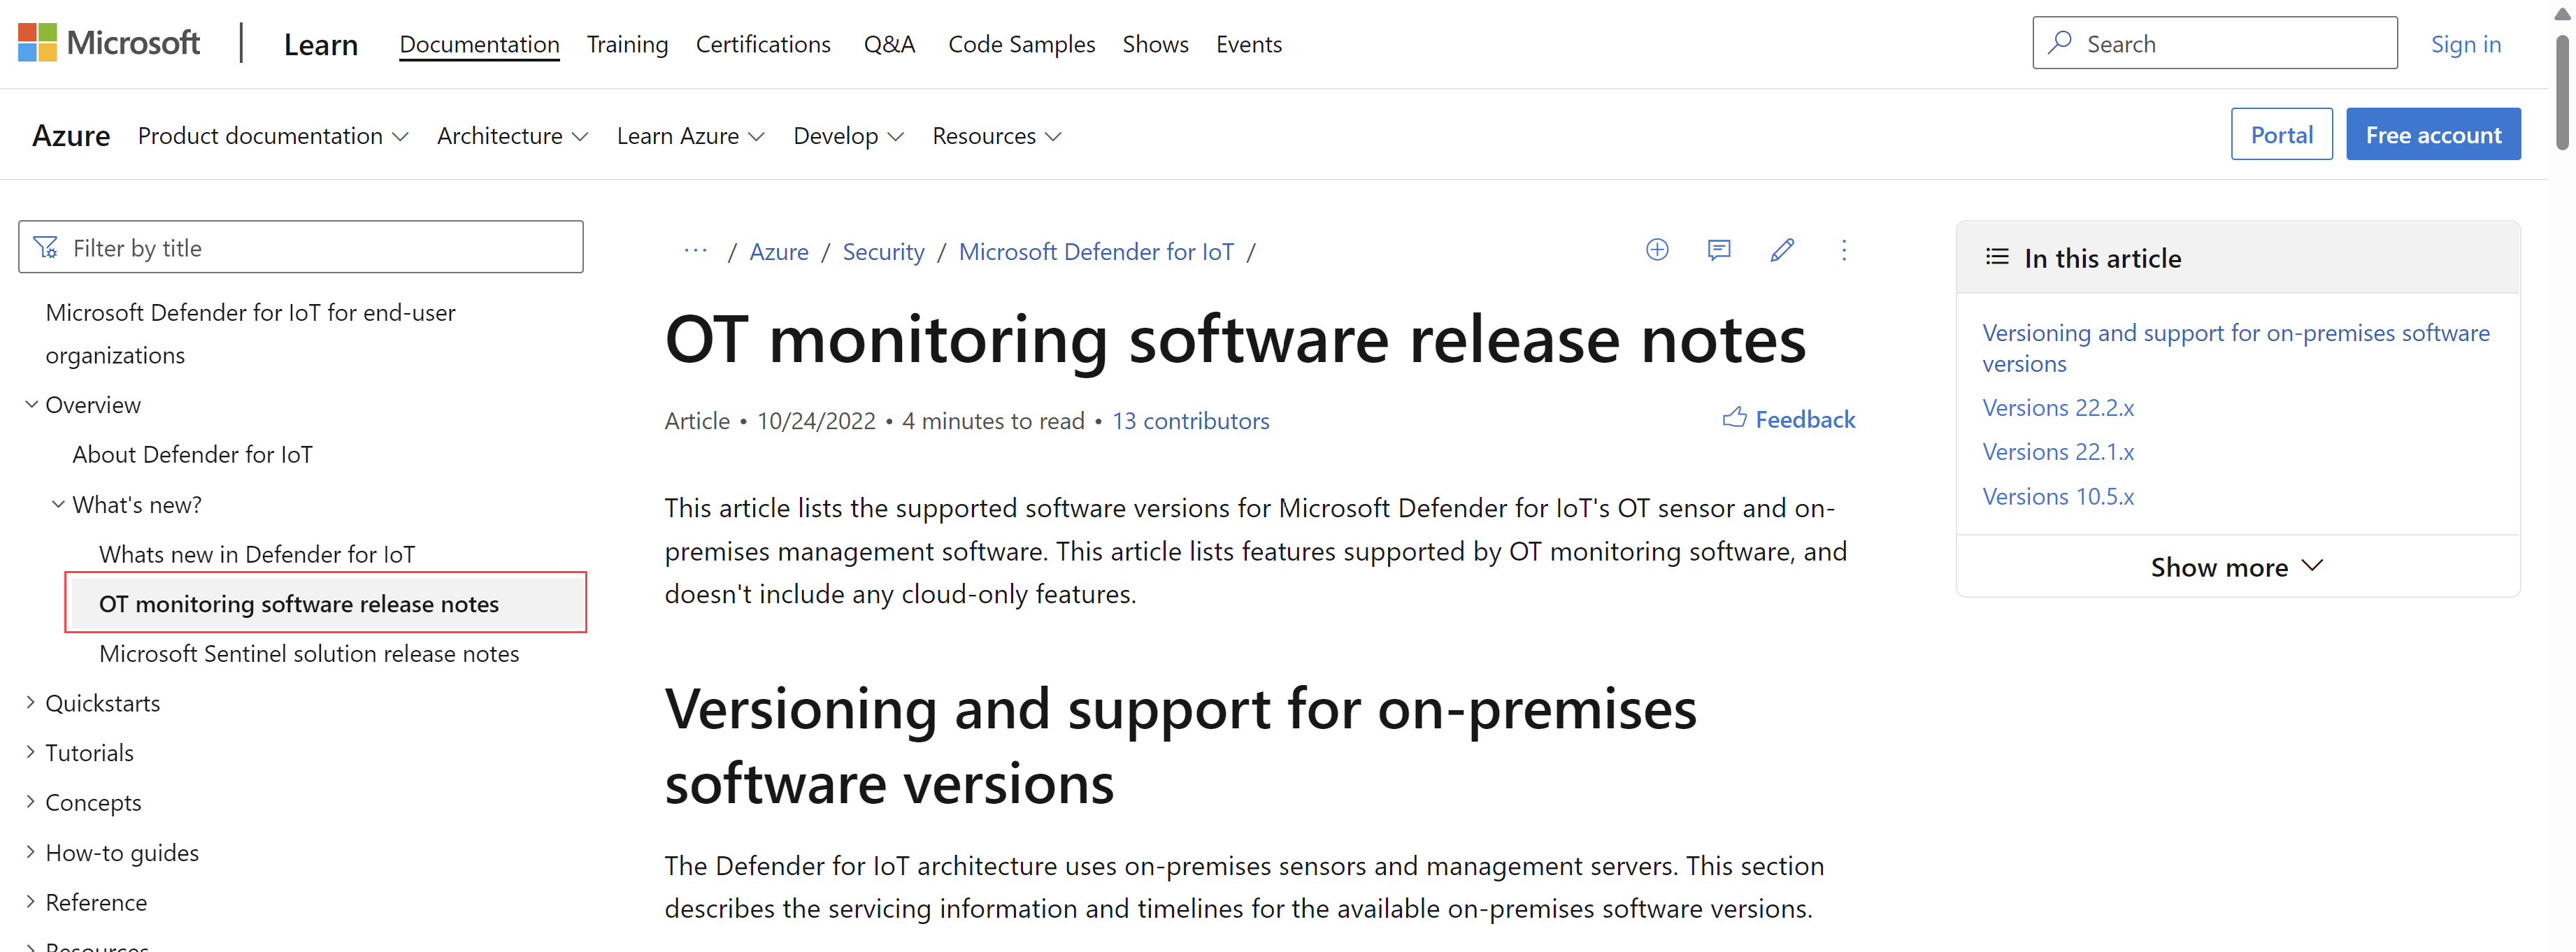 Screenshot of the new OT monitoring software release notes page in docs.